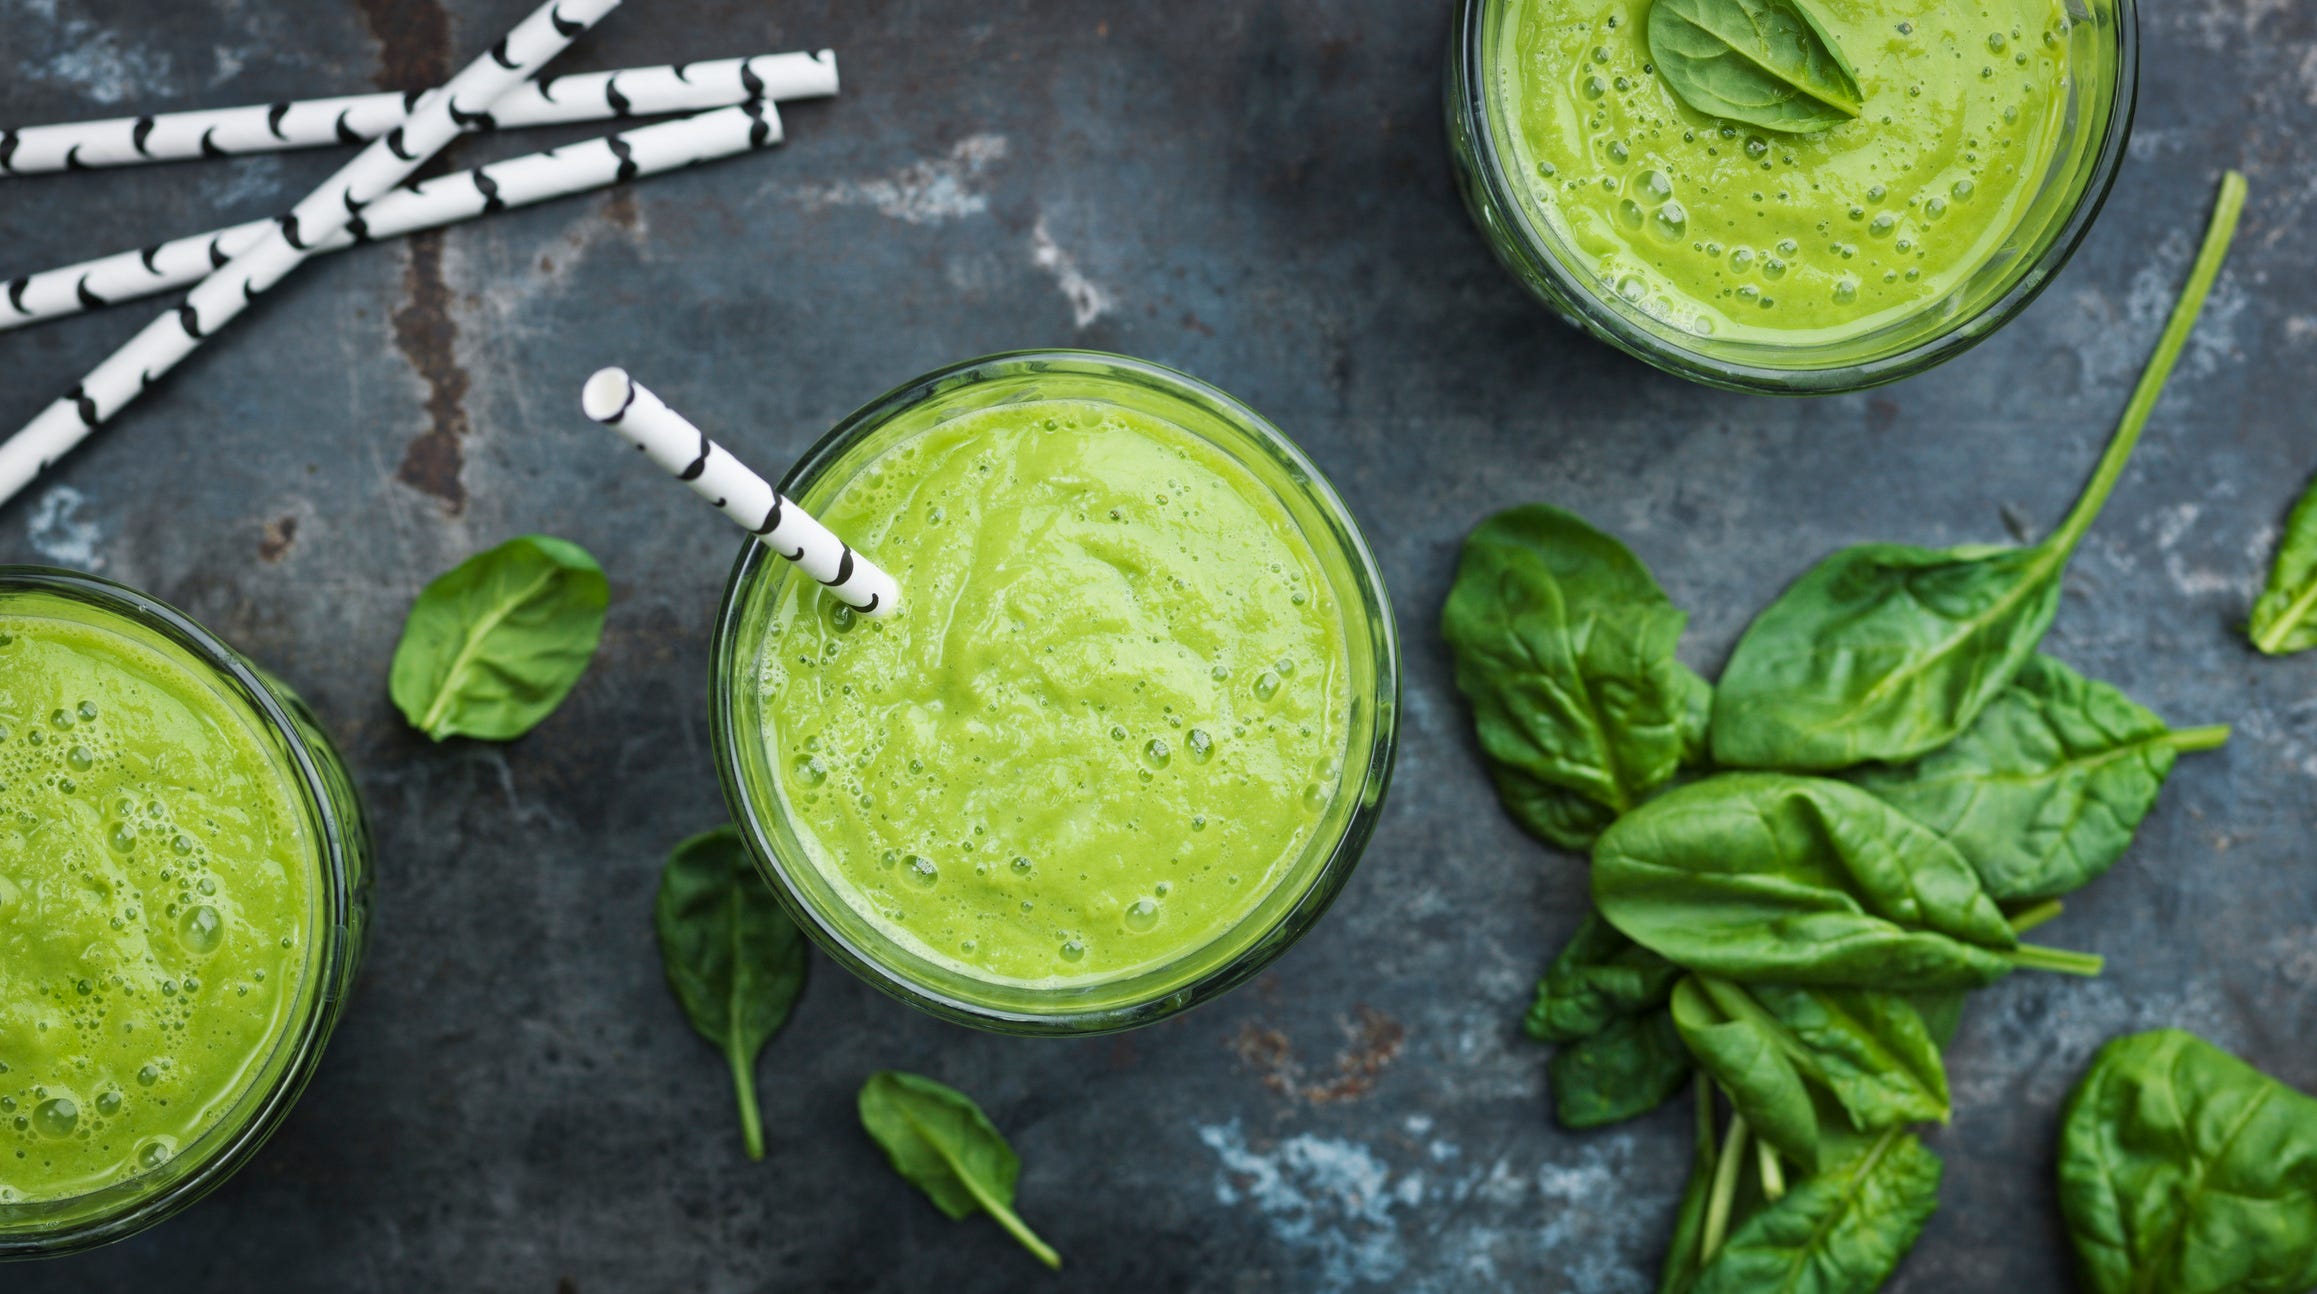 Spinach is a great sneaky vegetable for smoothies, but Jerome Adams has a secret second veggie.